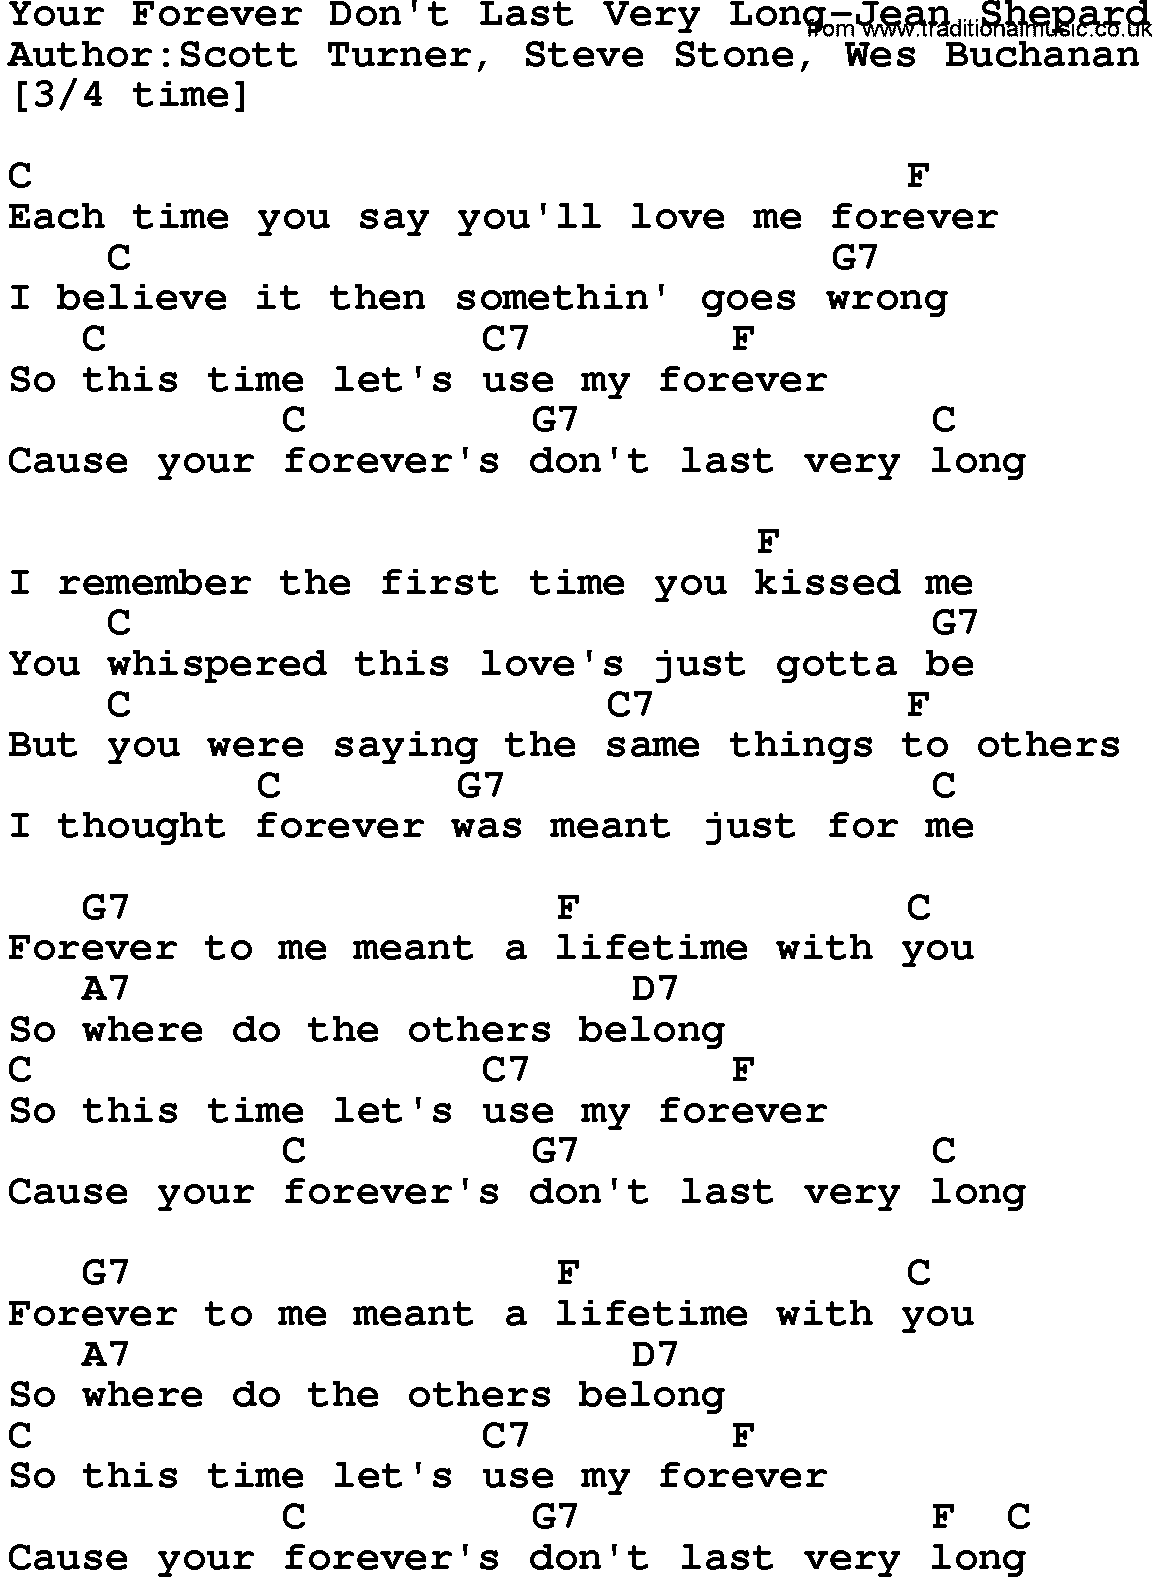 Country music song: Your Forever Don't Last Very Long-Jean Shepard lyrics and chords